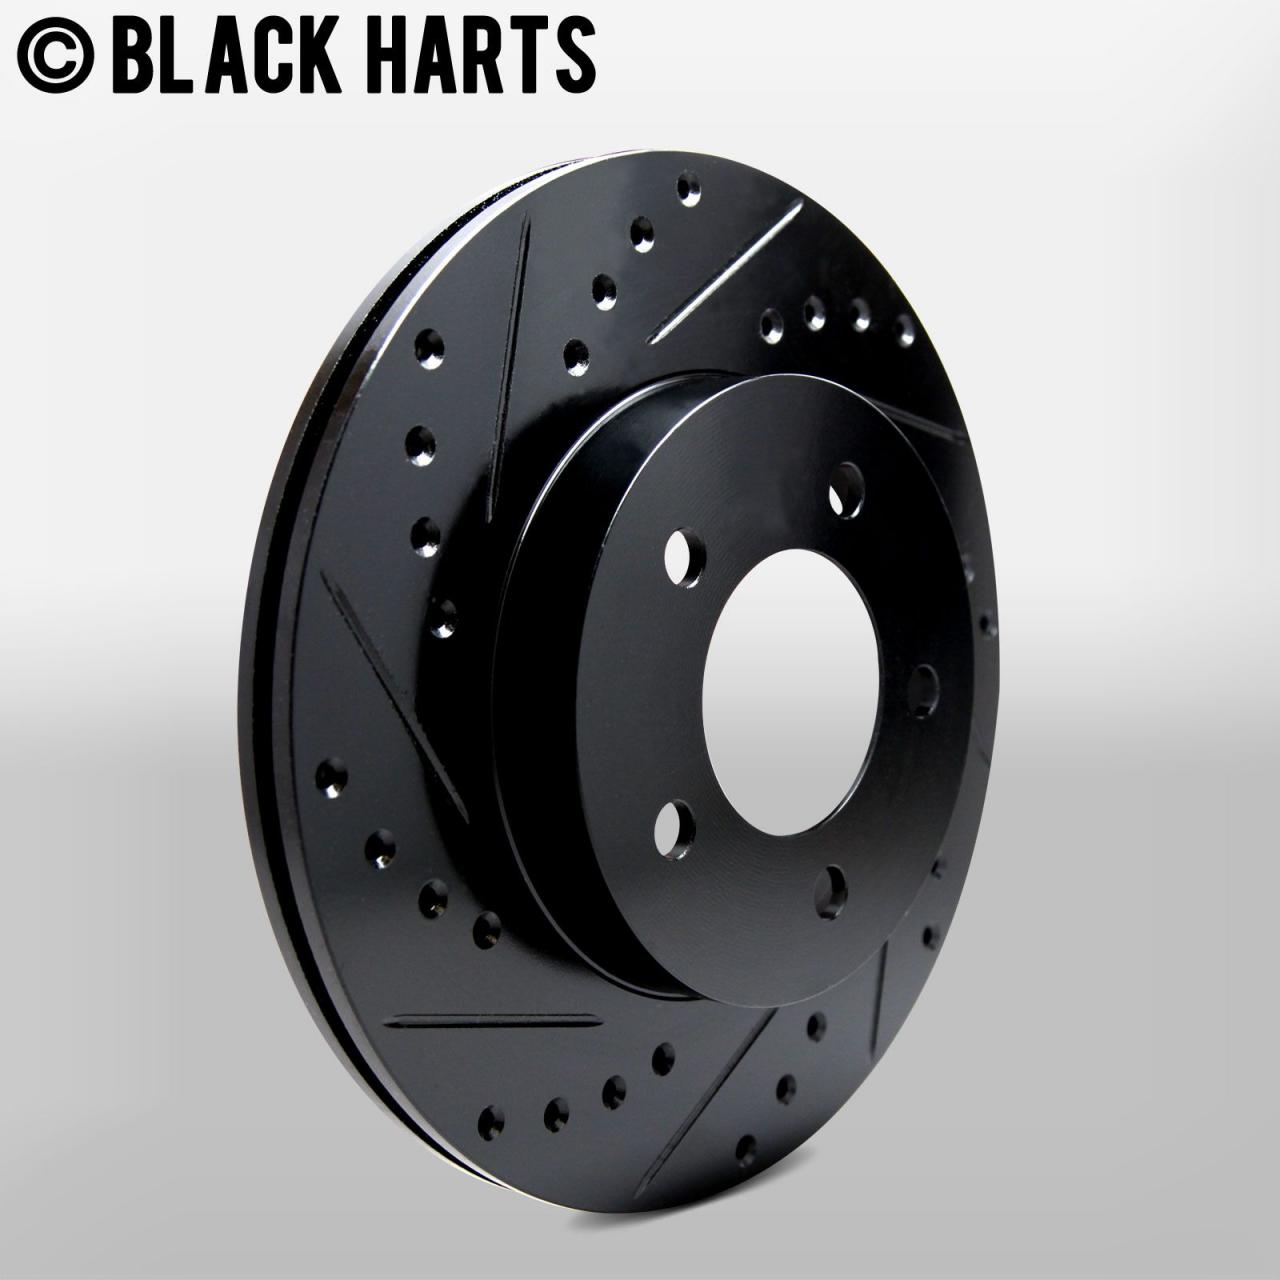 Auto Parts & Accessories Car & Truck Parts 1358 CERAMIC Pads Platinum Hart * DRILLED & SLOTTED* Brake Rotors FRONT KIT